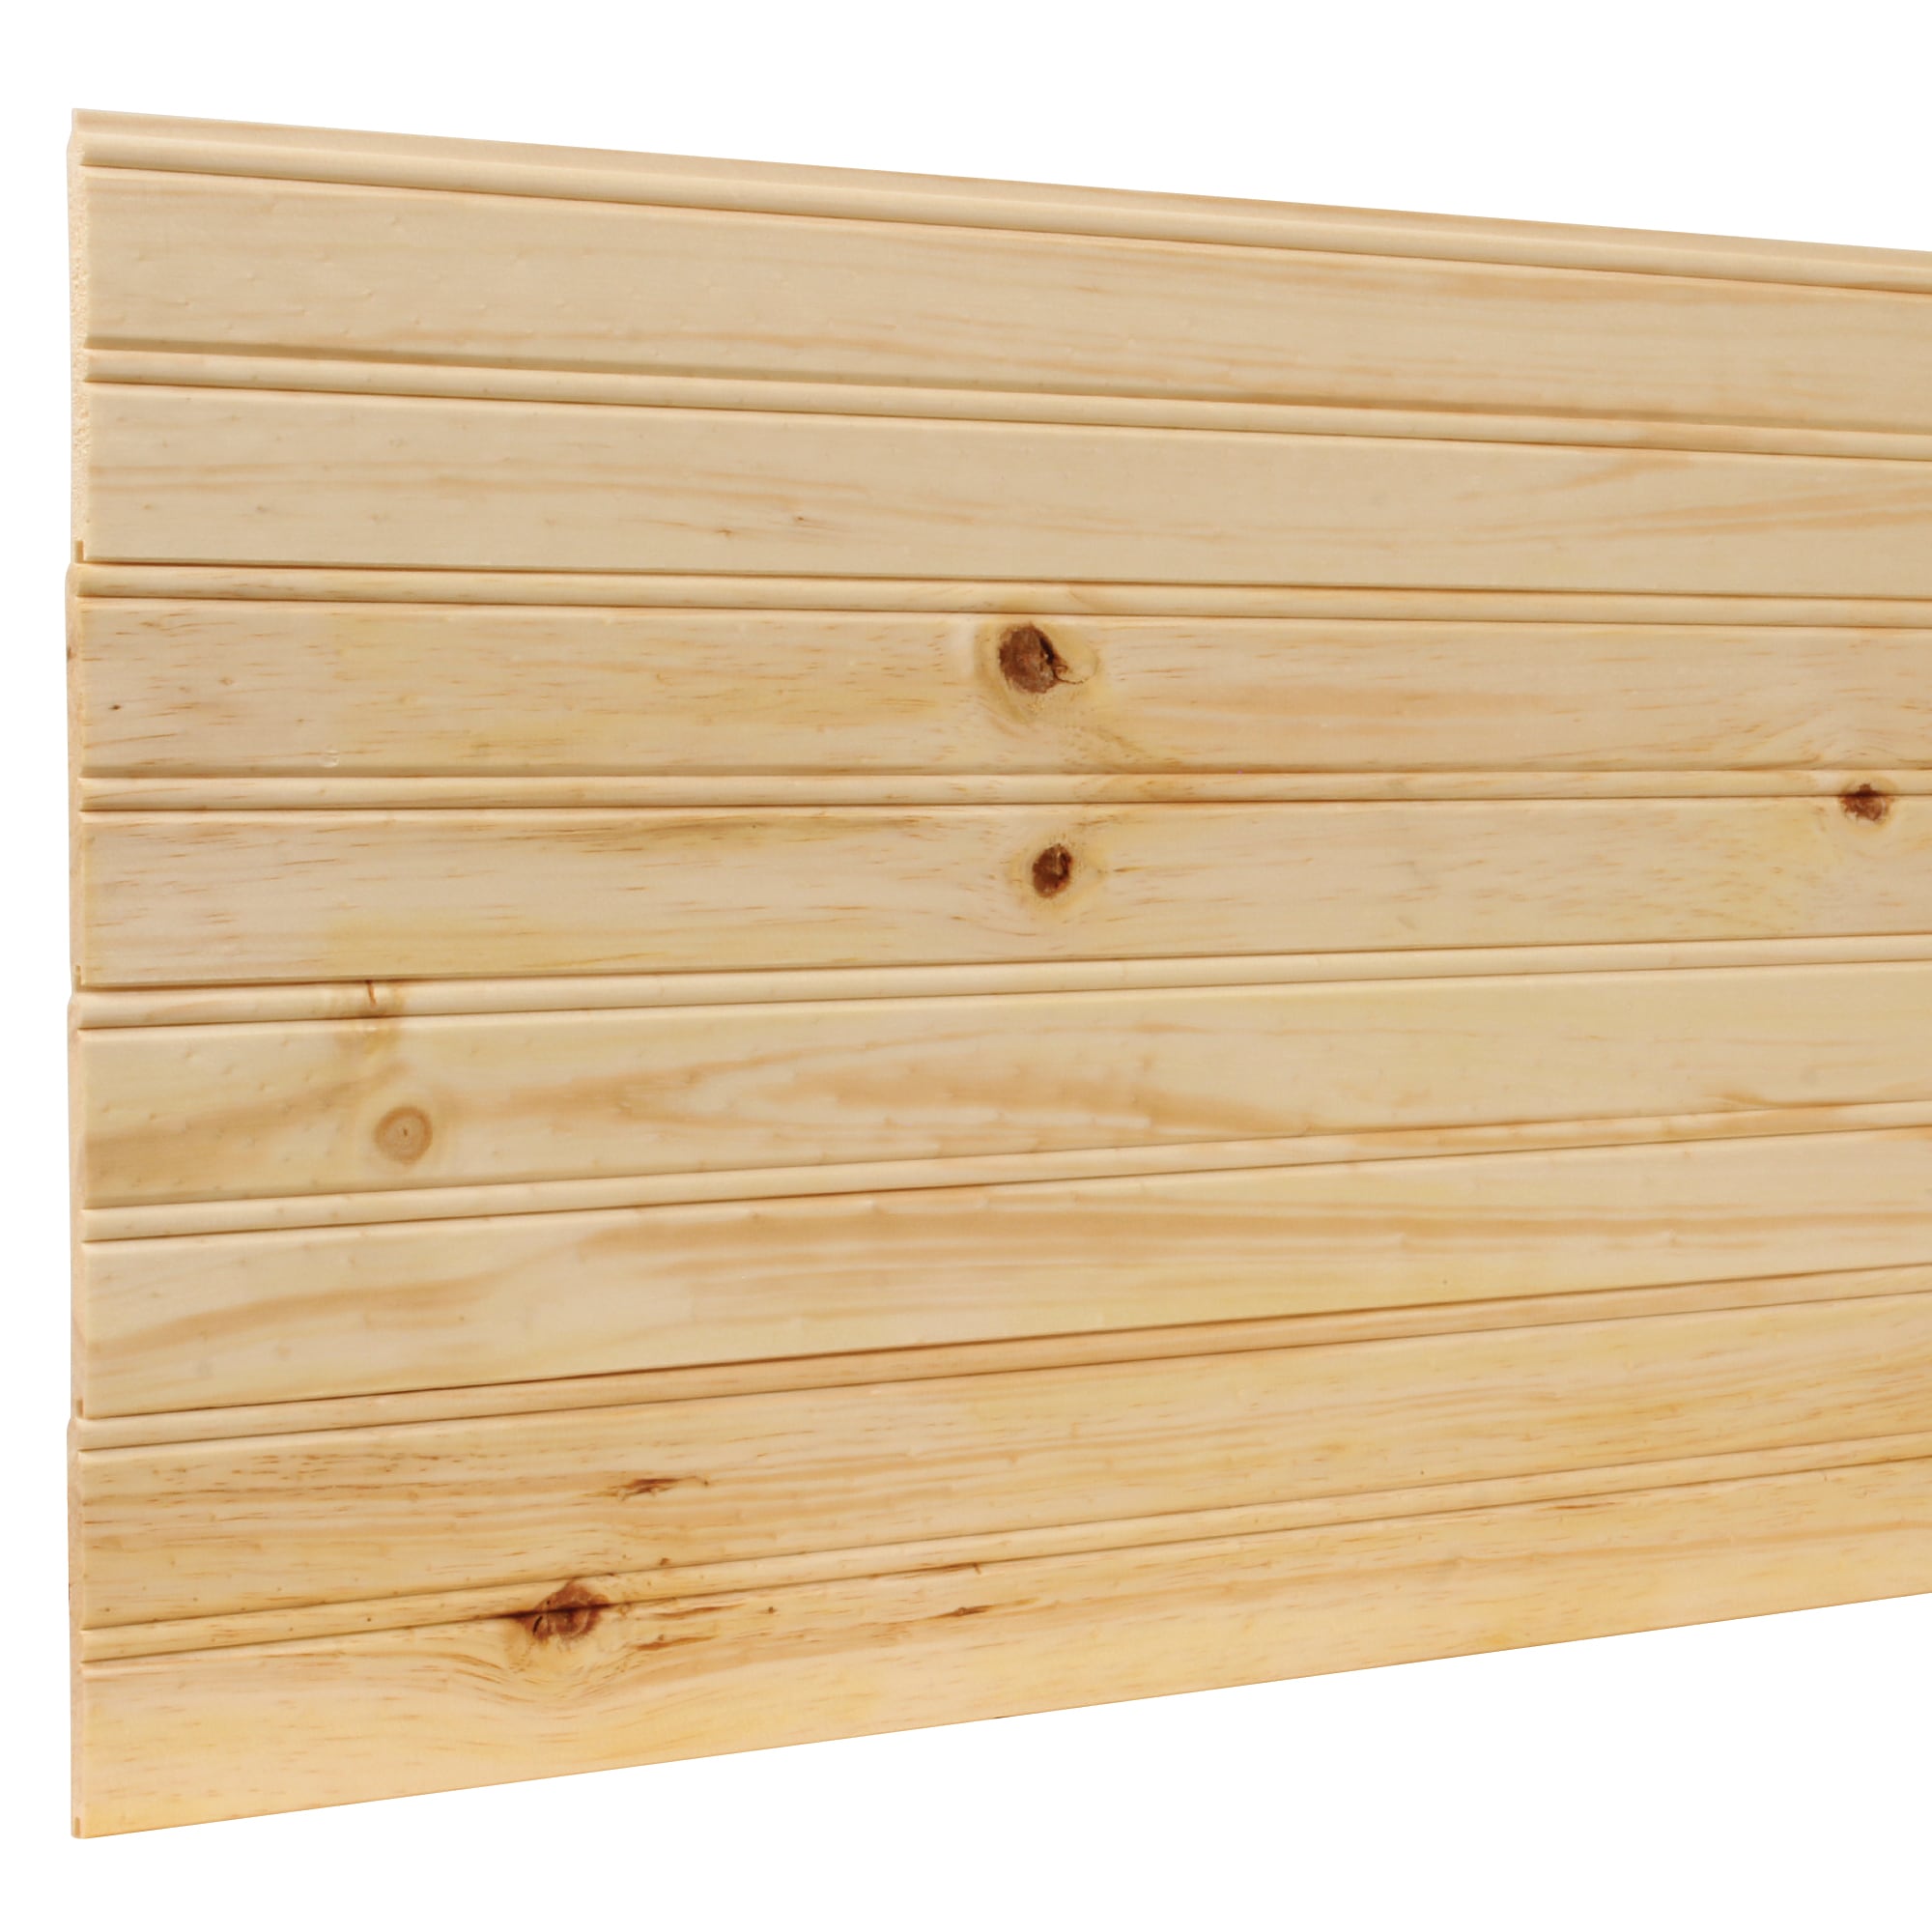 Timberwall Wooden Pallet Pine Wood Wall Plank Kit (Coverage Area